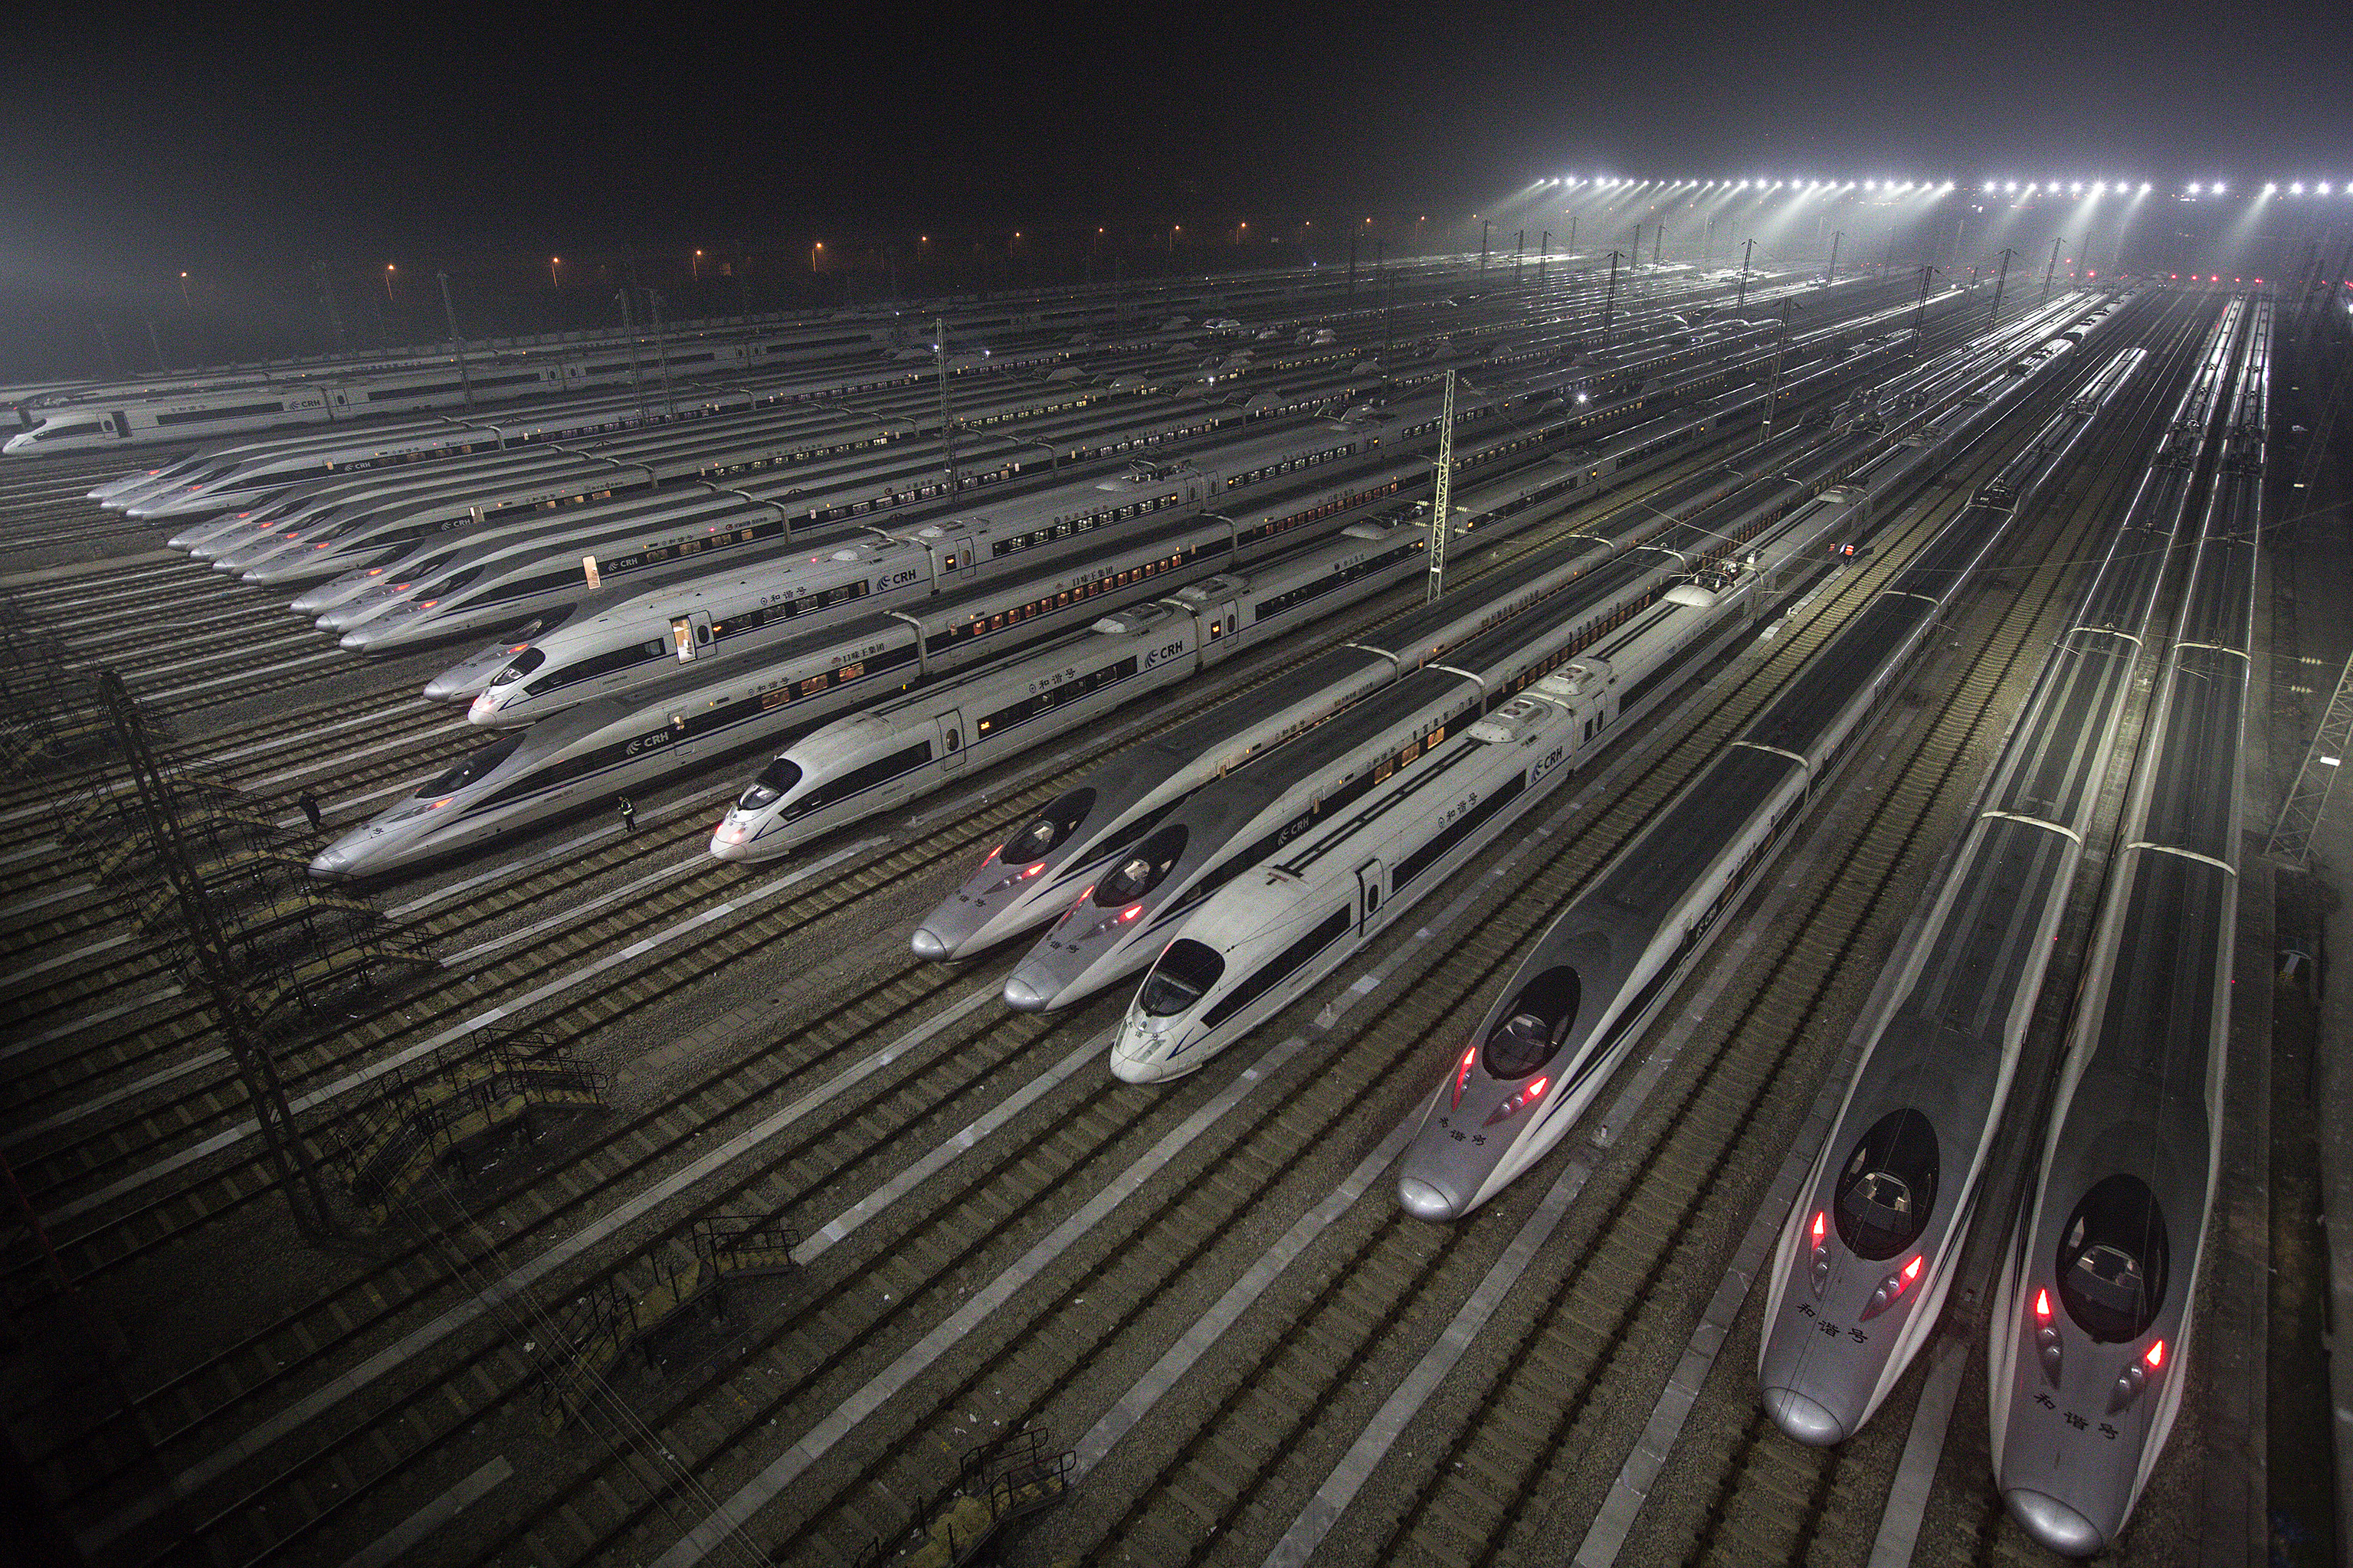 China has the largest rail network in the world